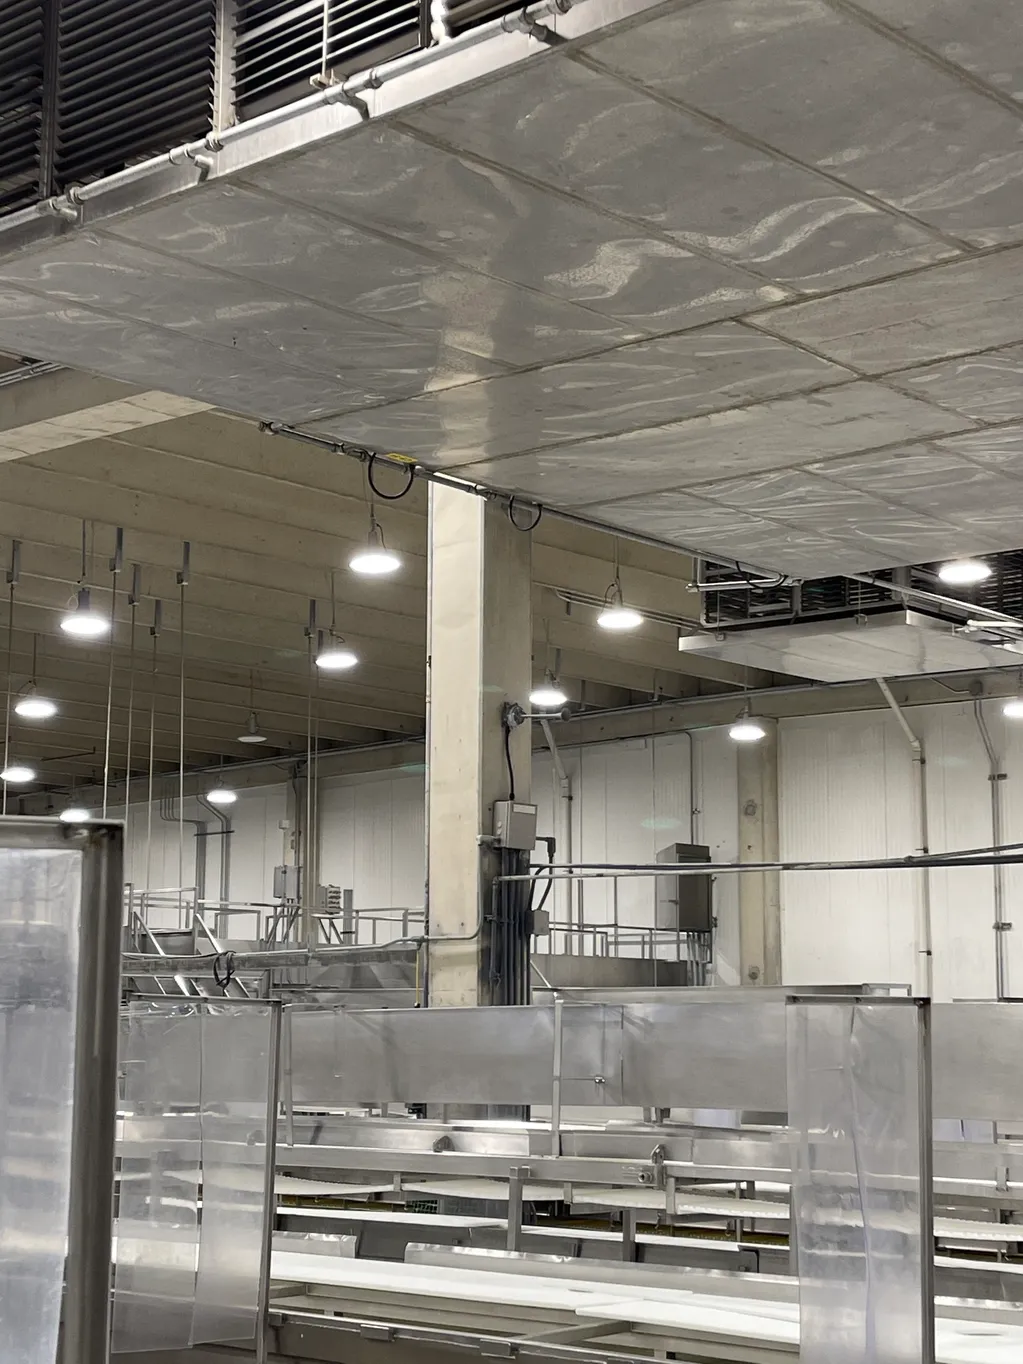 A site with temporary suspended ceiling covers